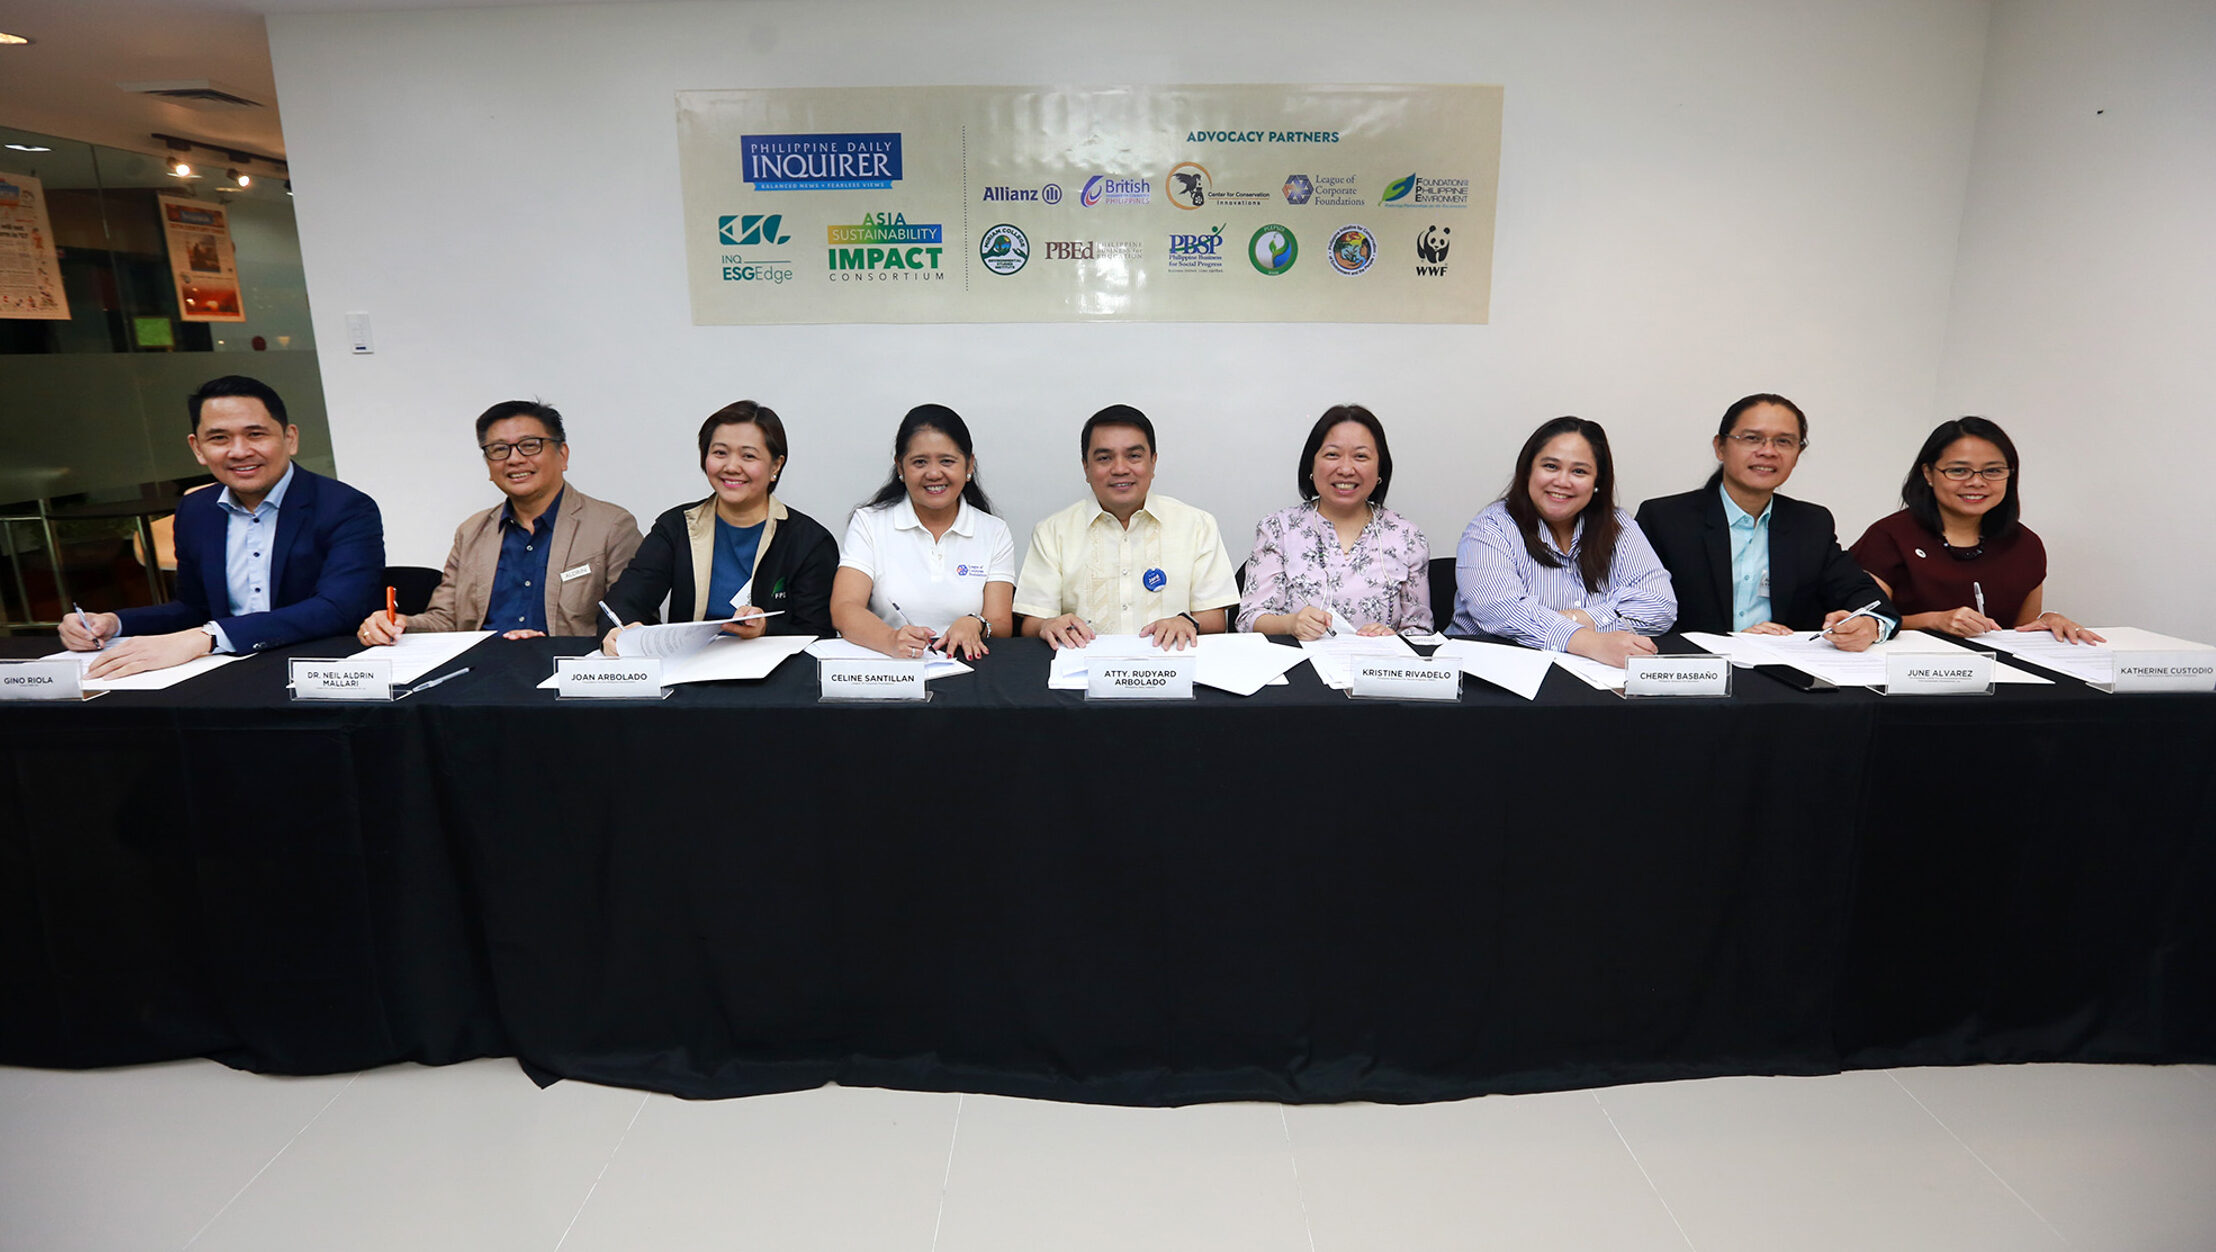 11 groups sign up as partners of Inquirer ESG Edge